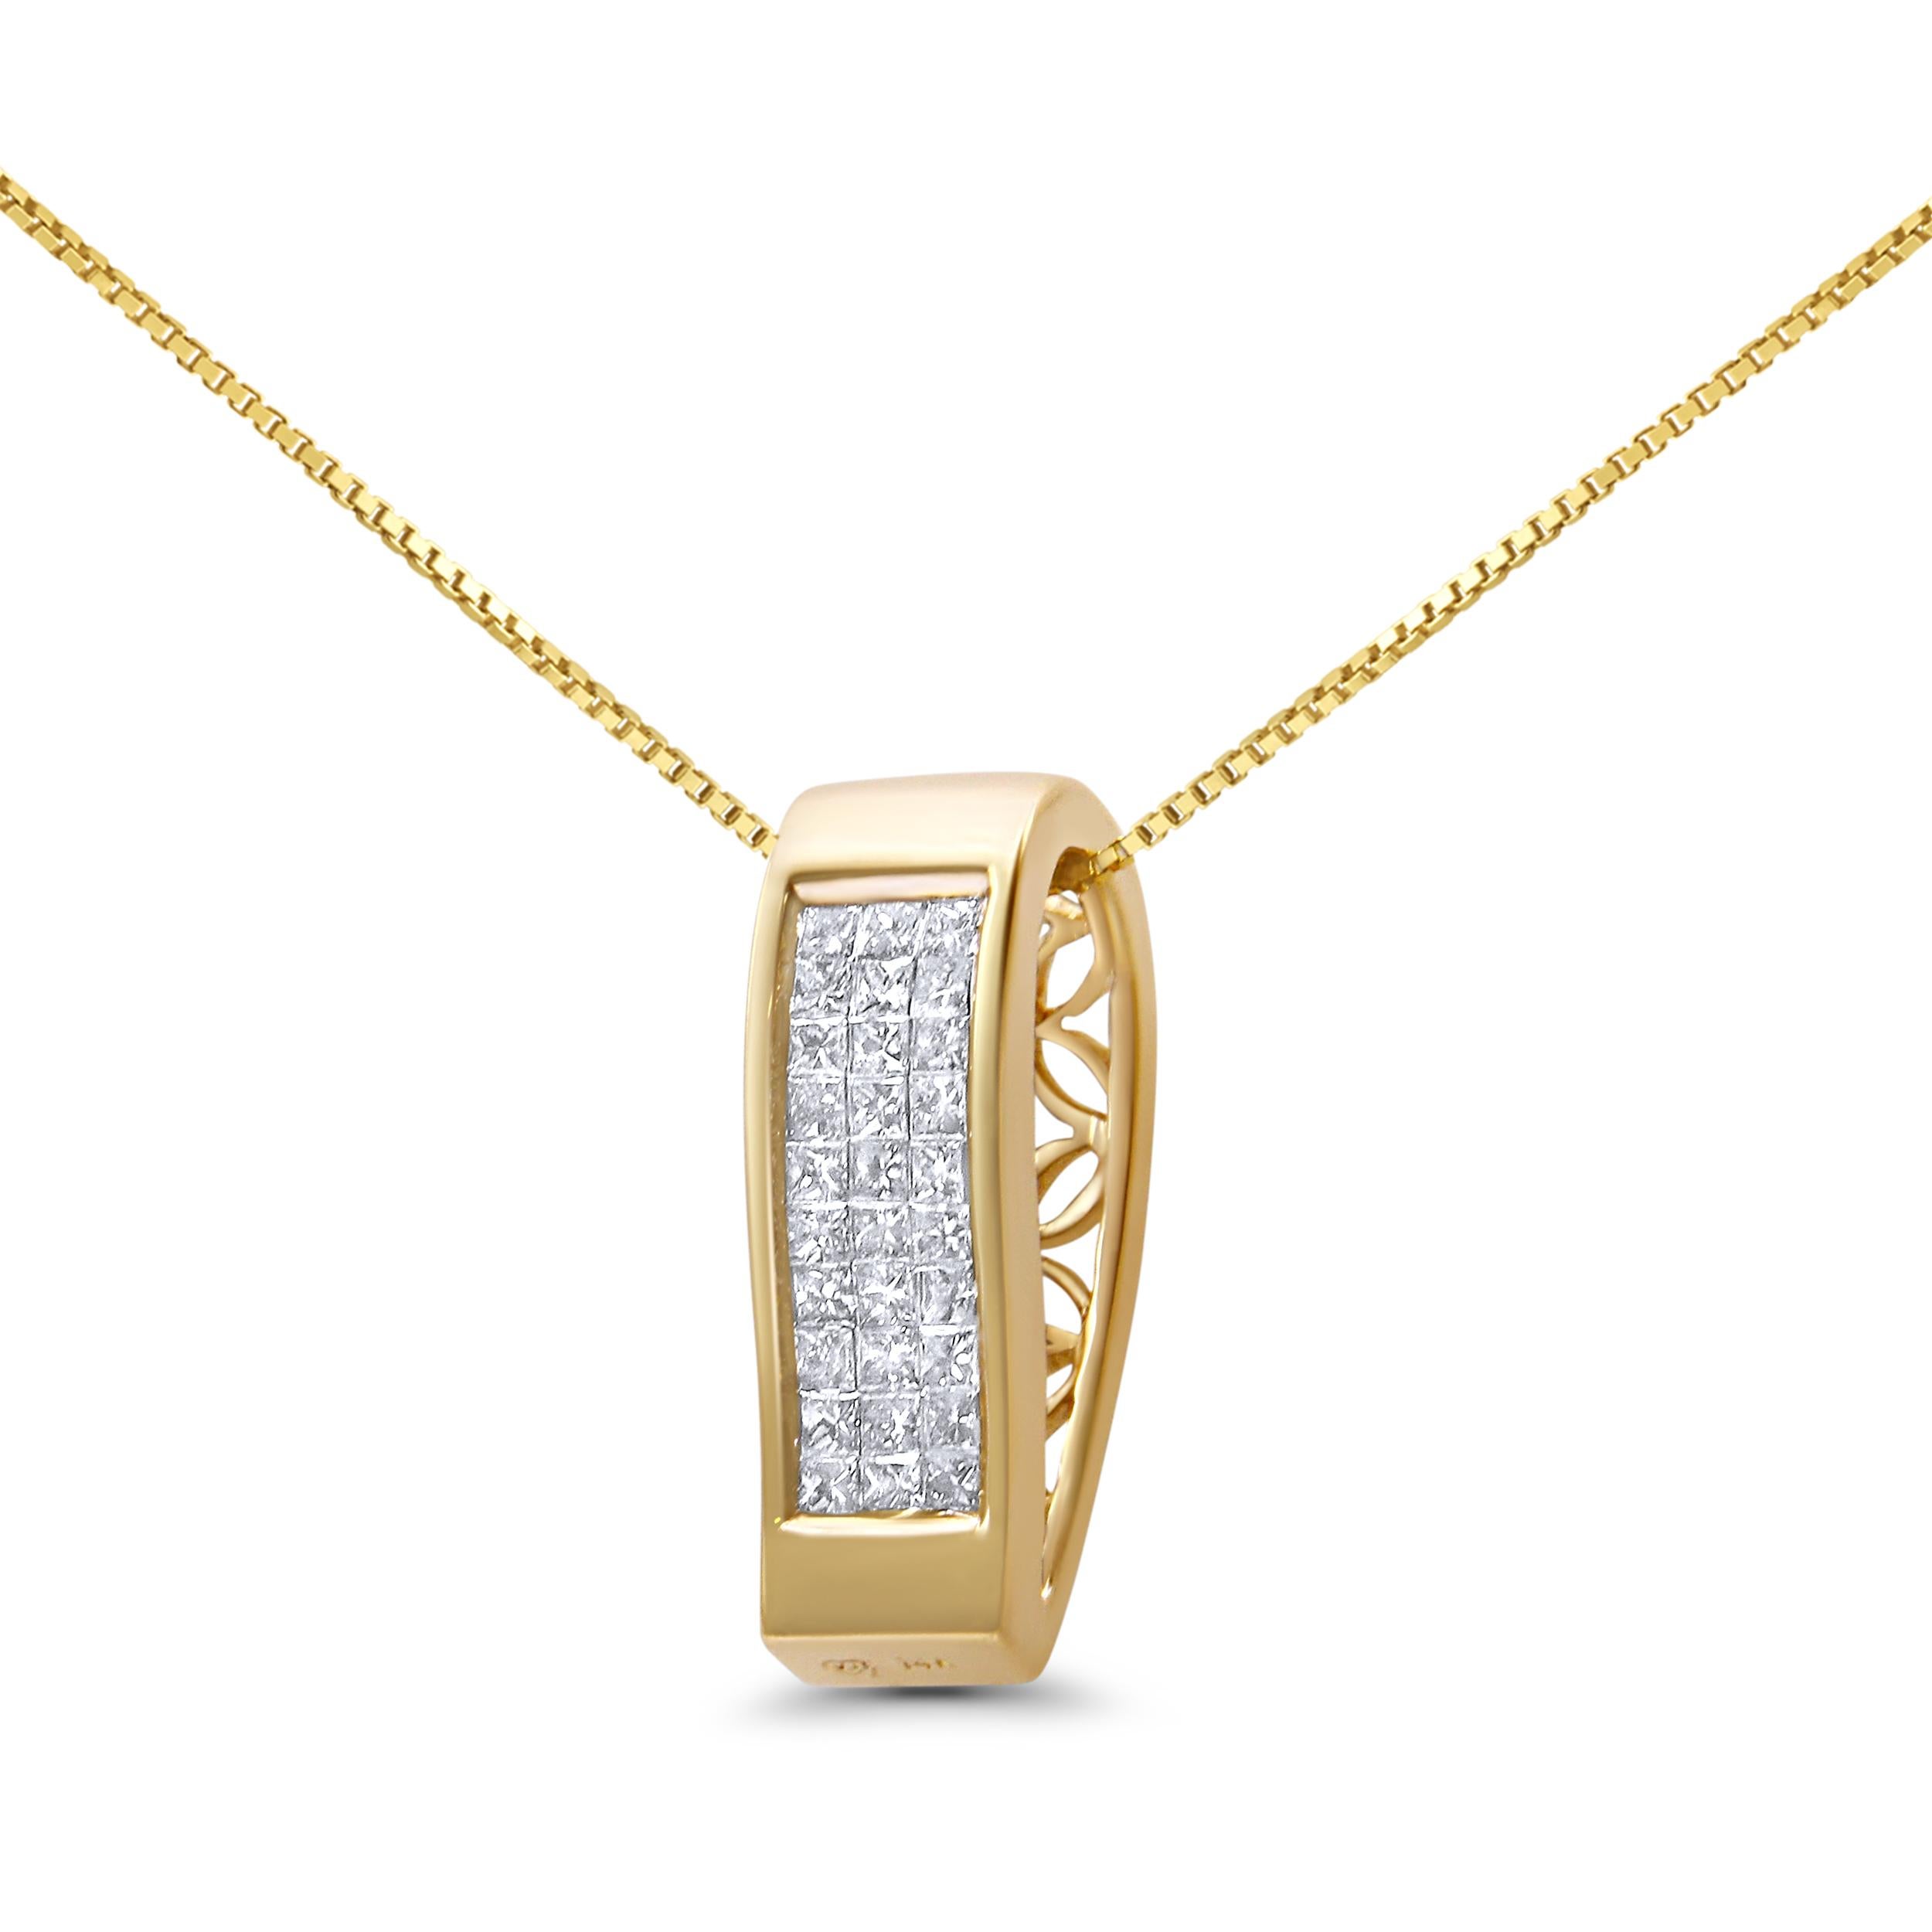 Created in a modern, contemporary design, this diamond vertical bar block pendant necklace radiates class and glamour. The minimalist bar block profile is juxtaposed by glamorous, linear princess cut diamonds in an invisible setting that perfectly